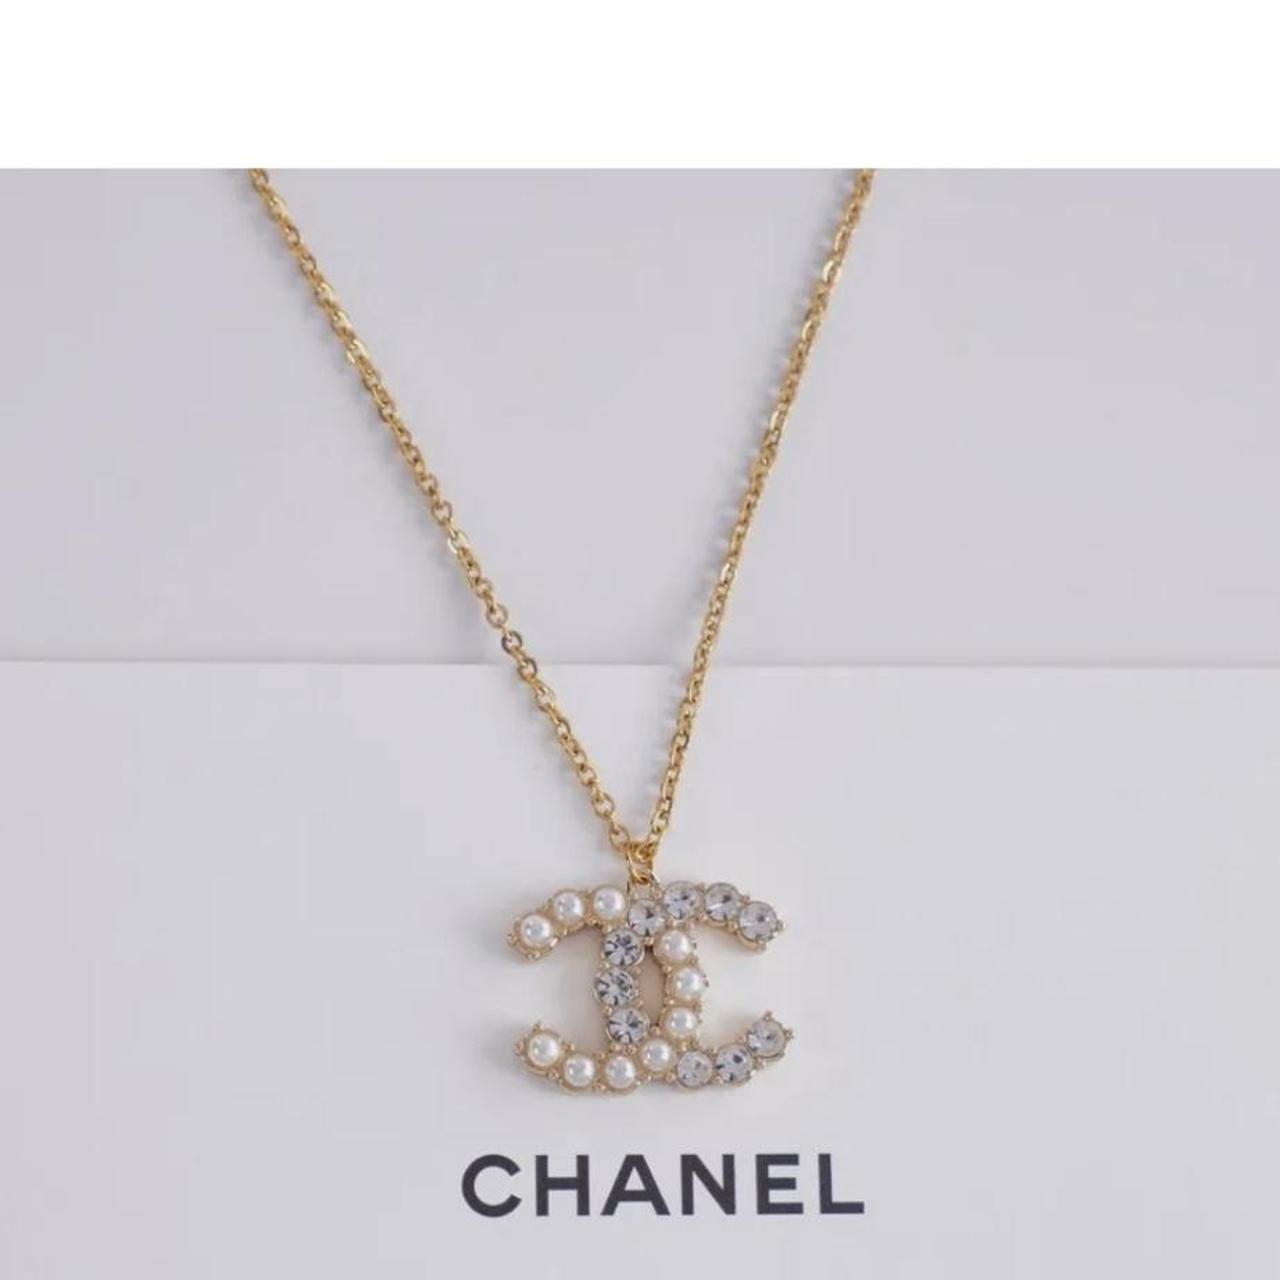 Gorgeous authentic CHANEL pearl and rhinestone CC